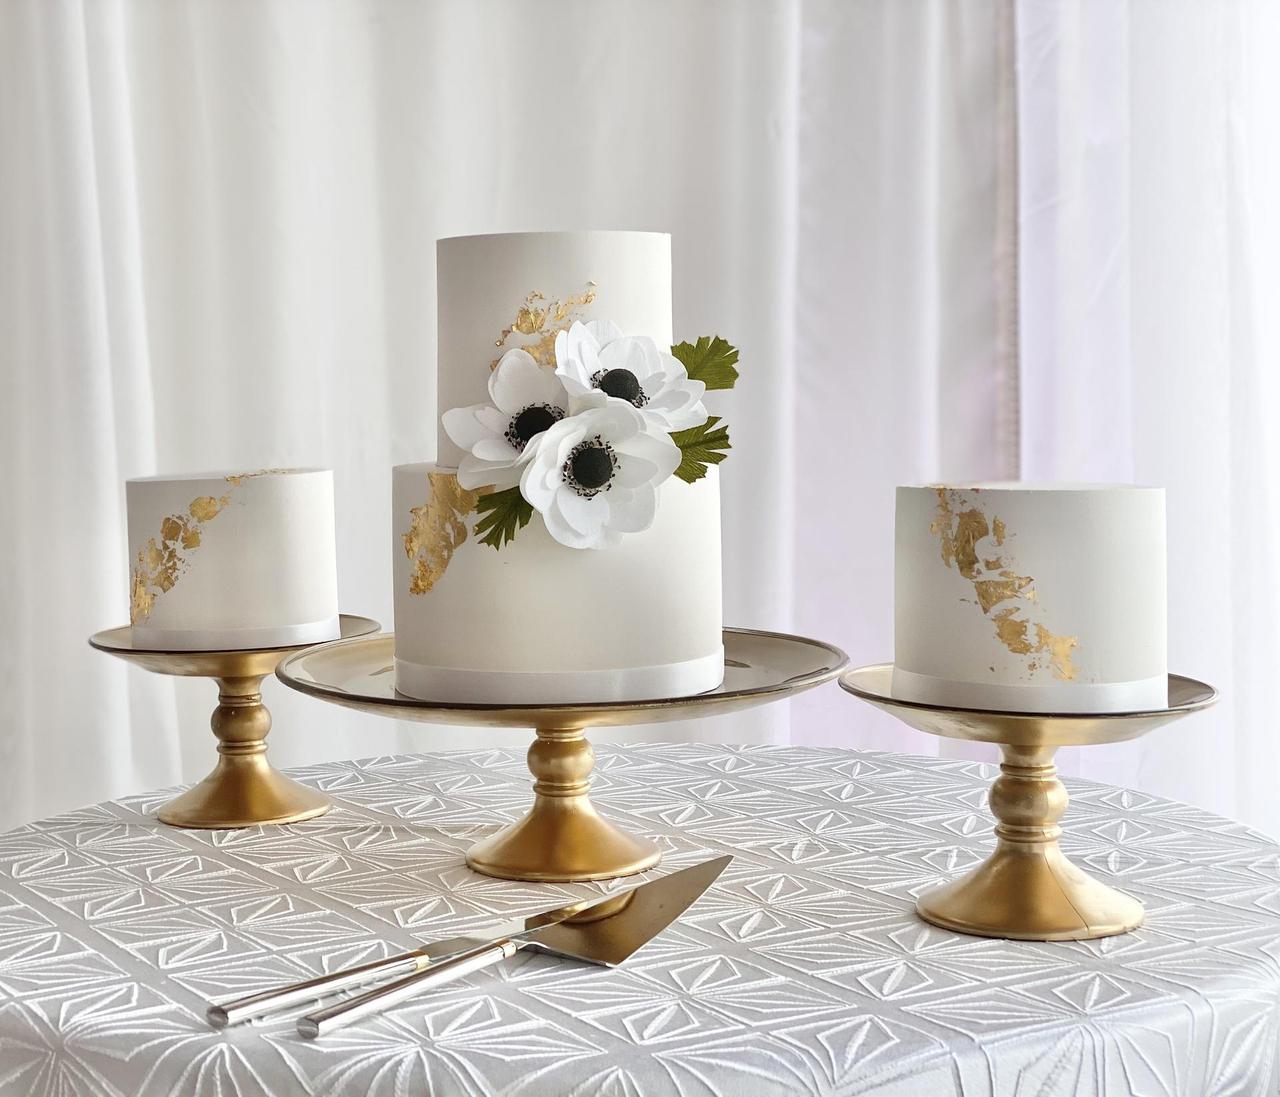 Coolest Wedding Cake Trends of 2019/2020